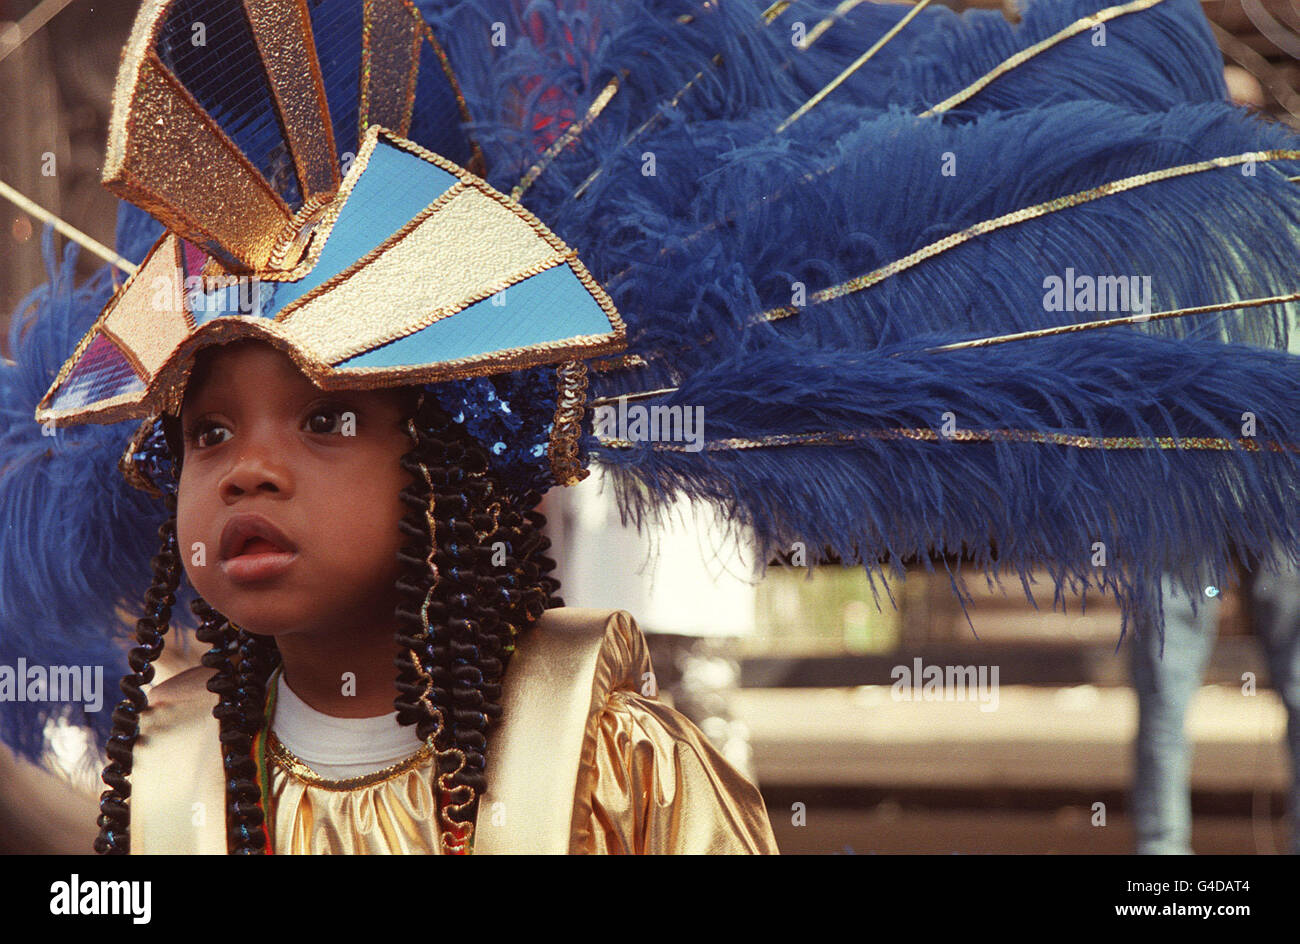 PA NEWS PHOTO 31/8/98 A CHILD DRESS IN AN ELABORATE COSTUME AT THE 1998 NOTTING HILL CARNIVAL. Stock Photo